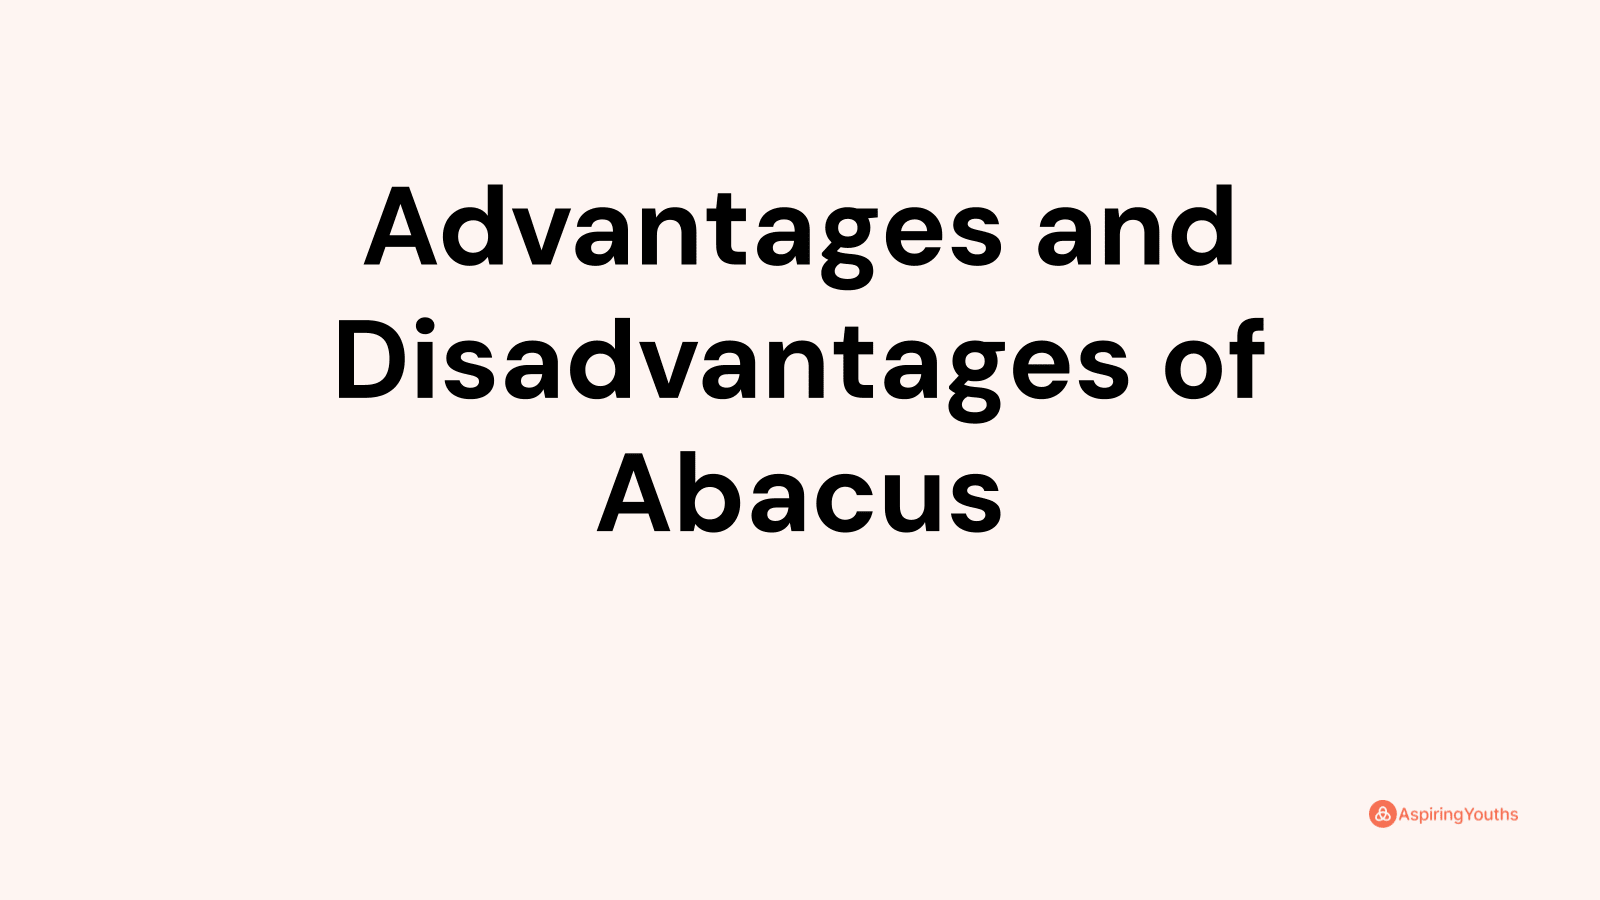 Advantages and disadvantages of Abacus